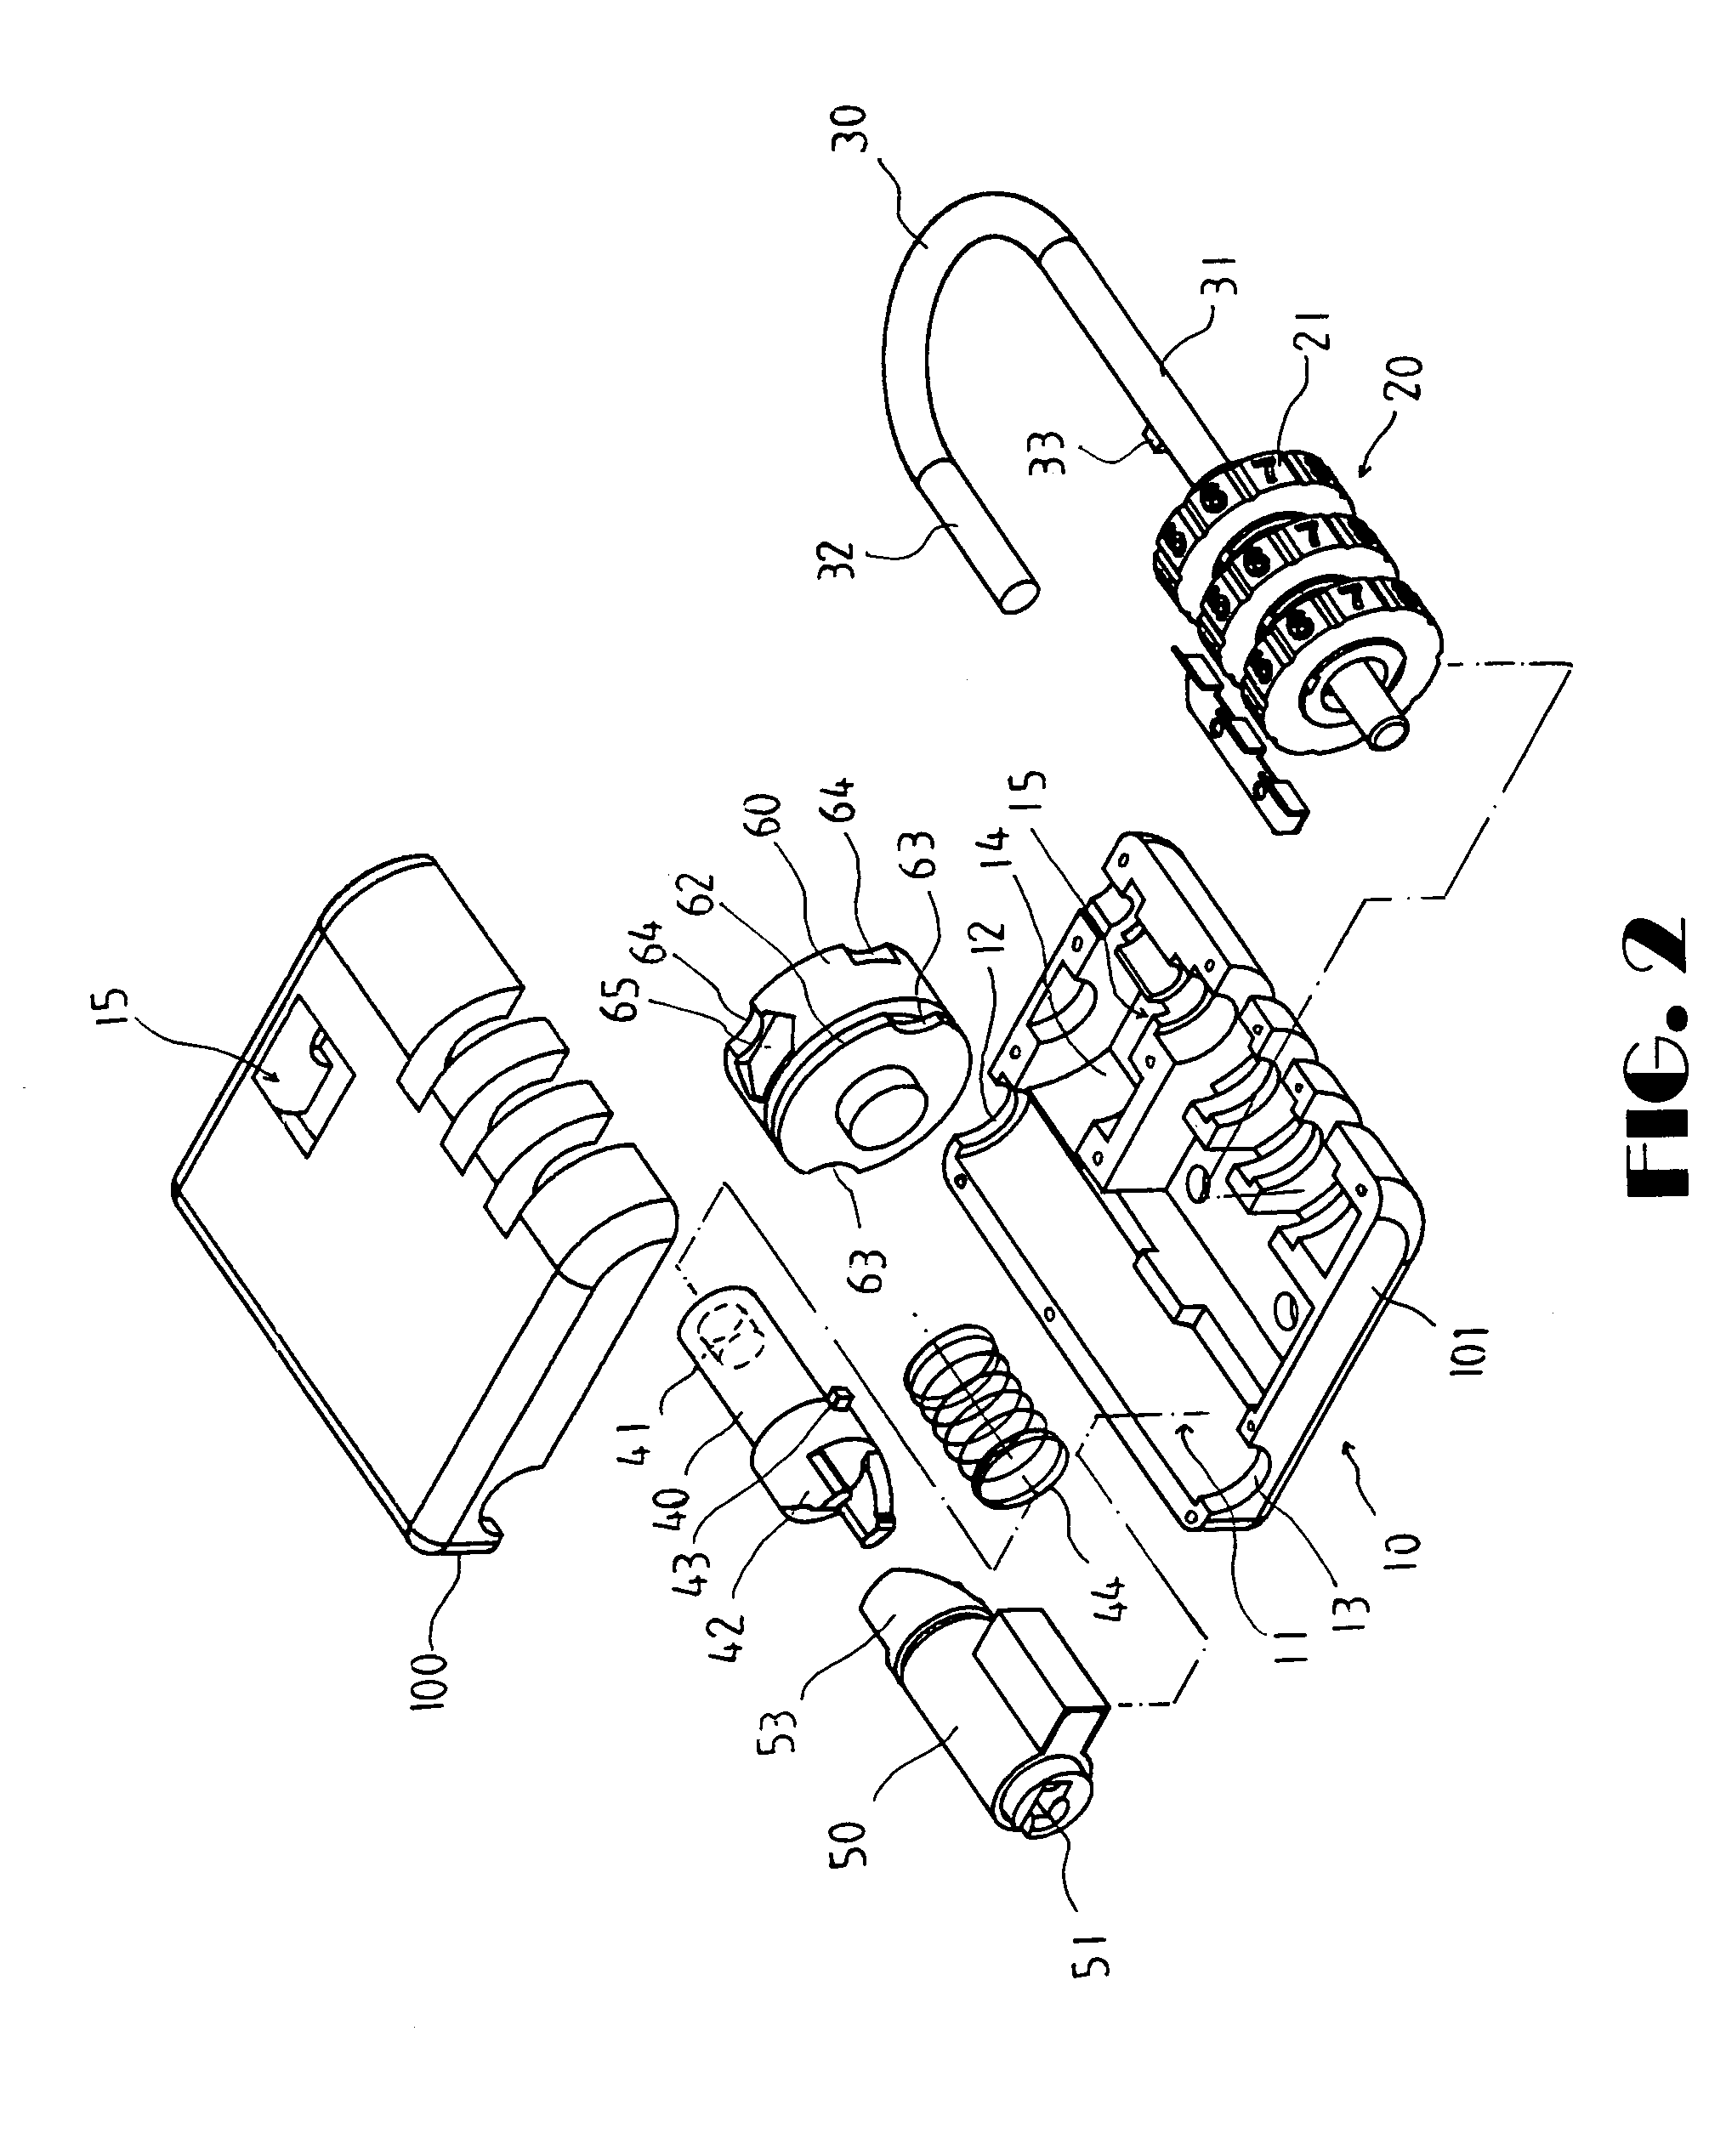 Combination lock and padlock combination with mechanism for visually indicating key opening permission